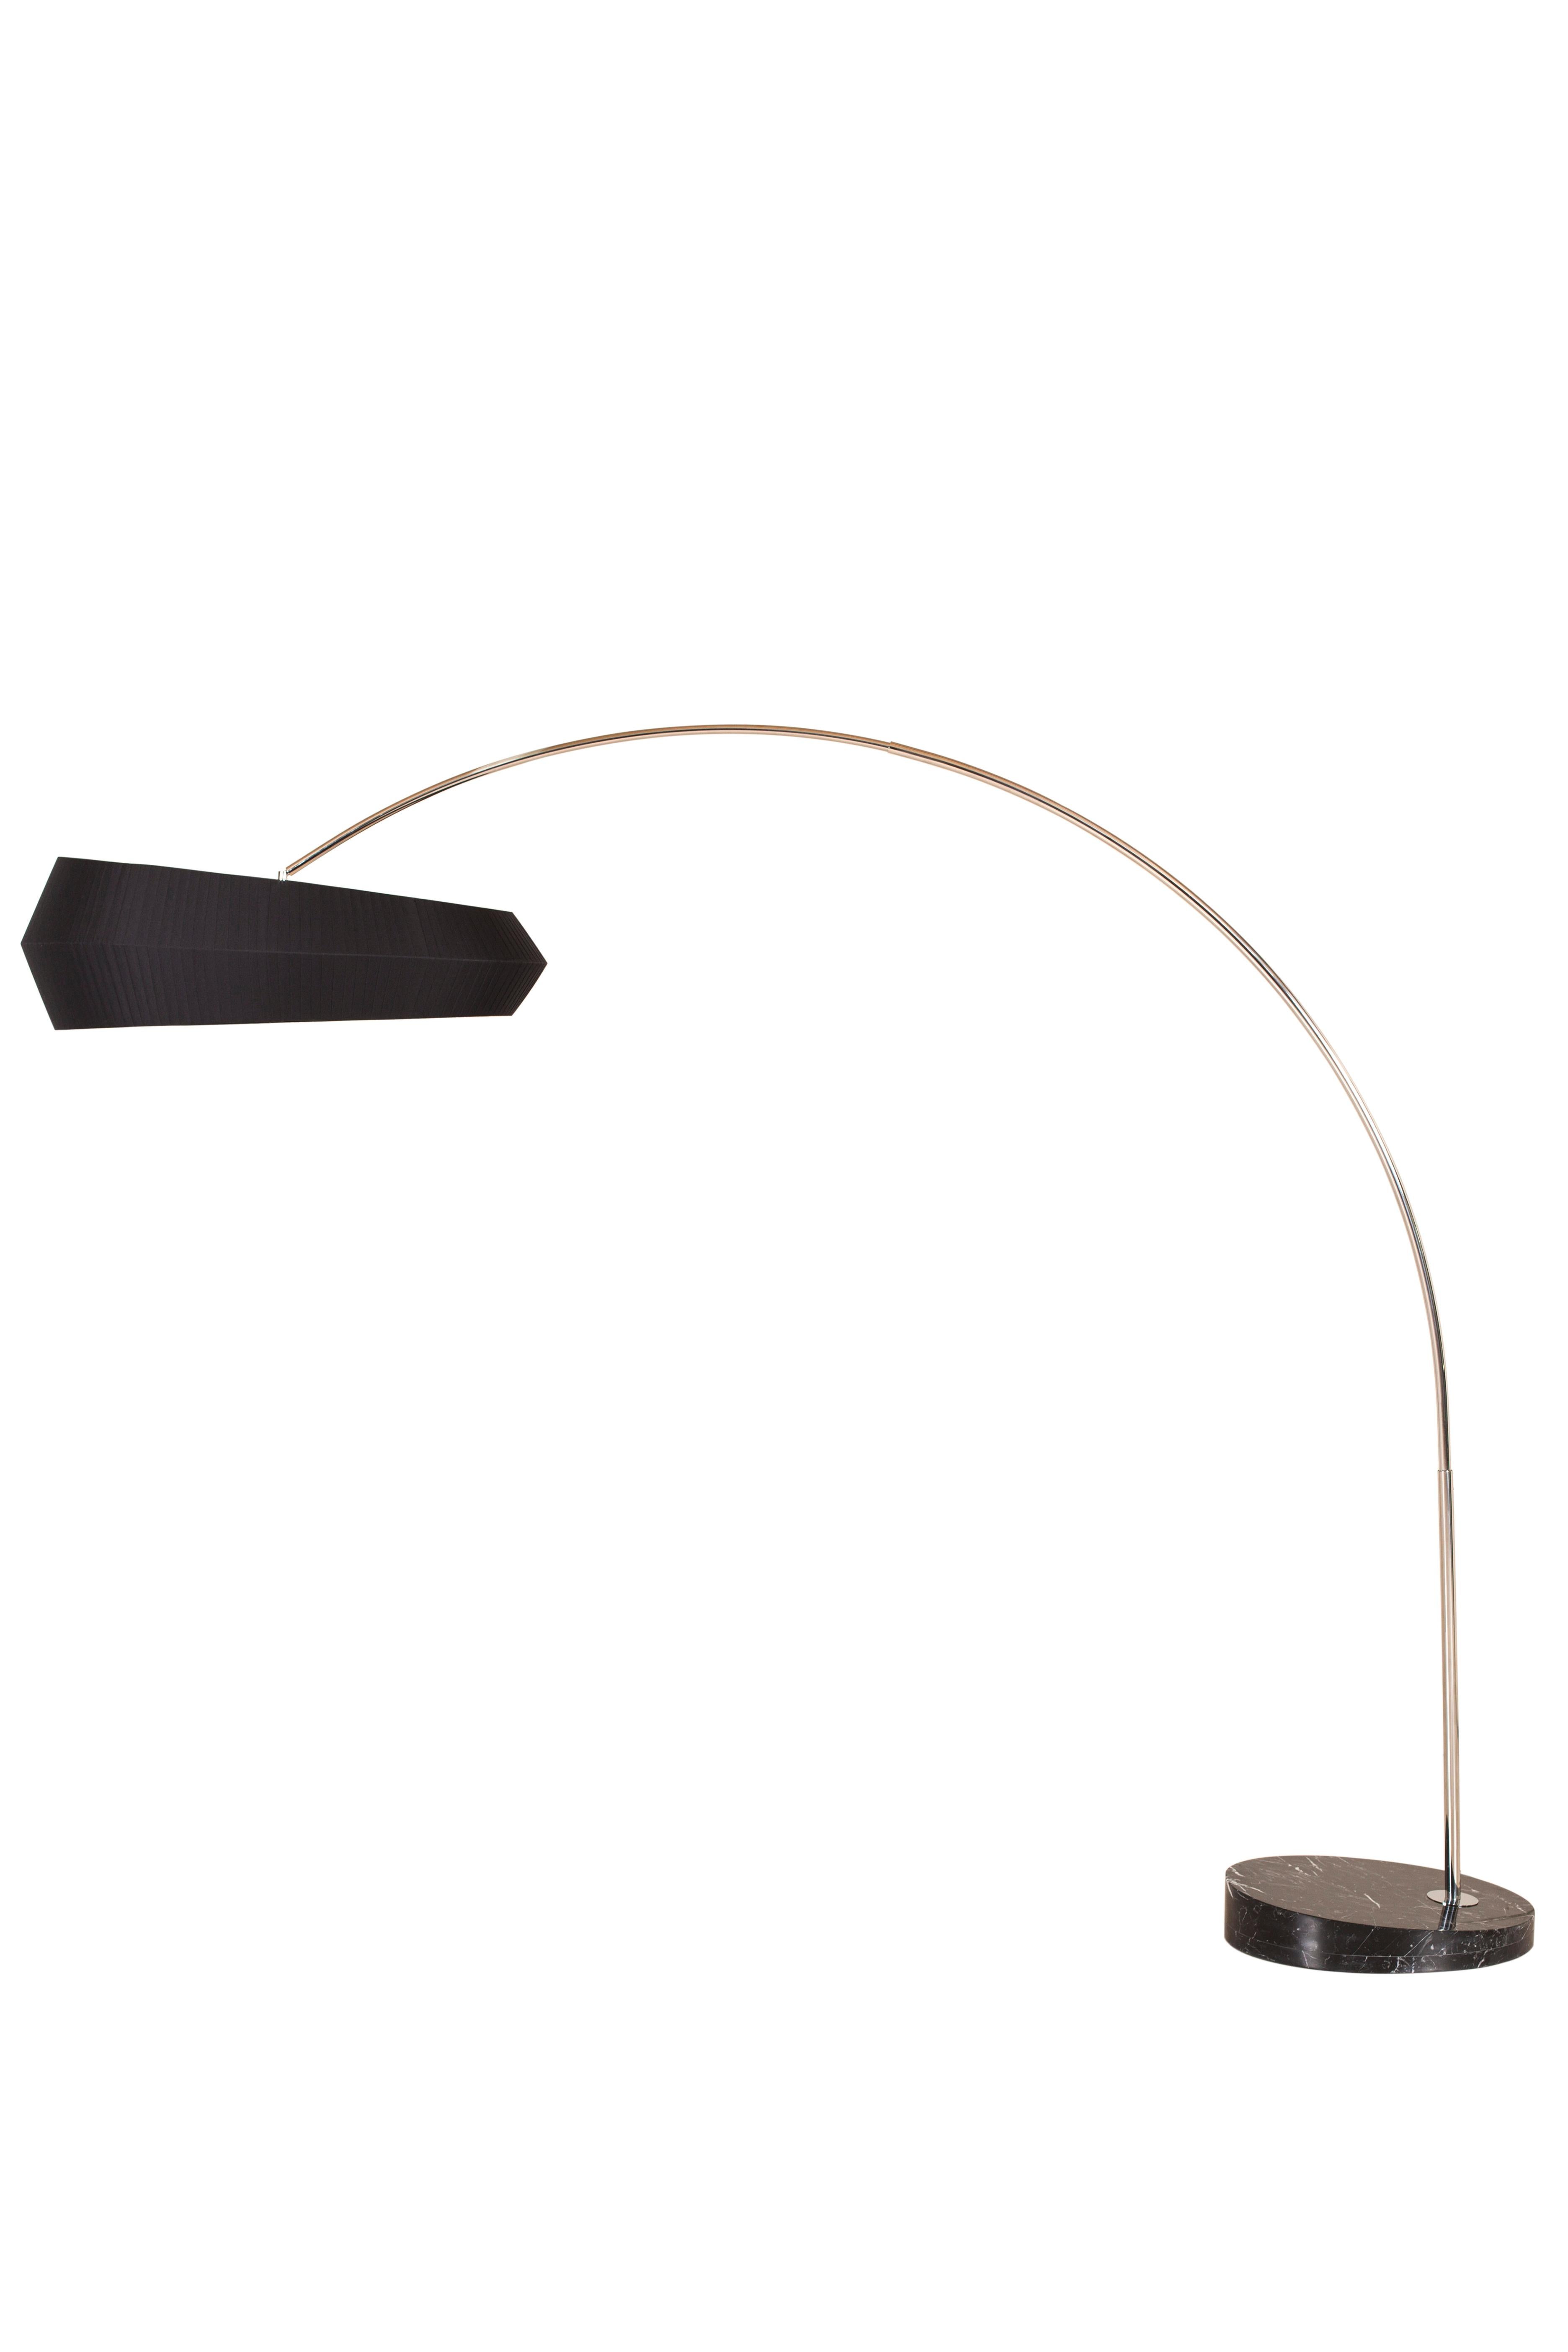 Hand-Crafted Modern Black Sublime Arc Floor Lamp, Marble, Handmade in Portugal by Greenapple For Sale